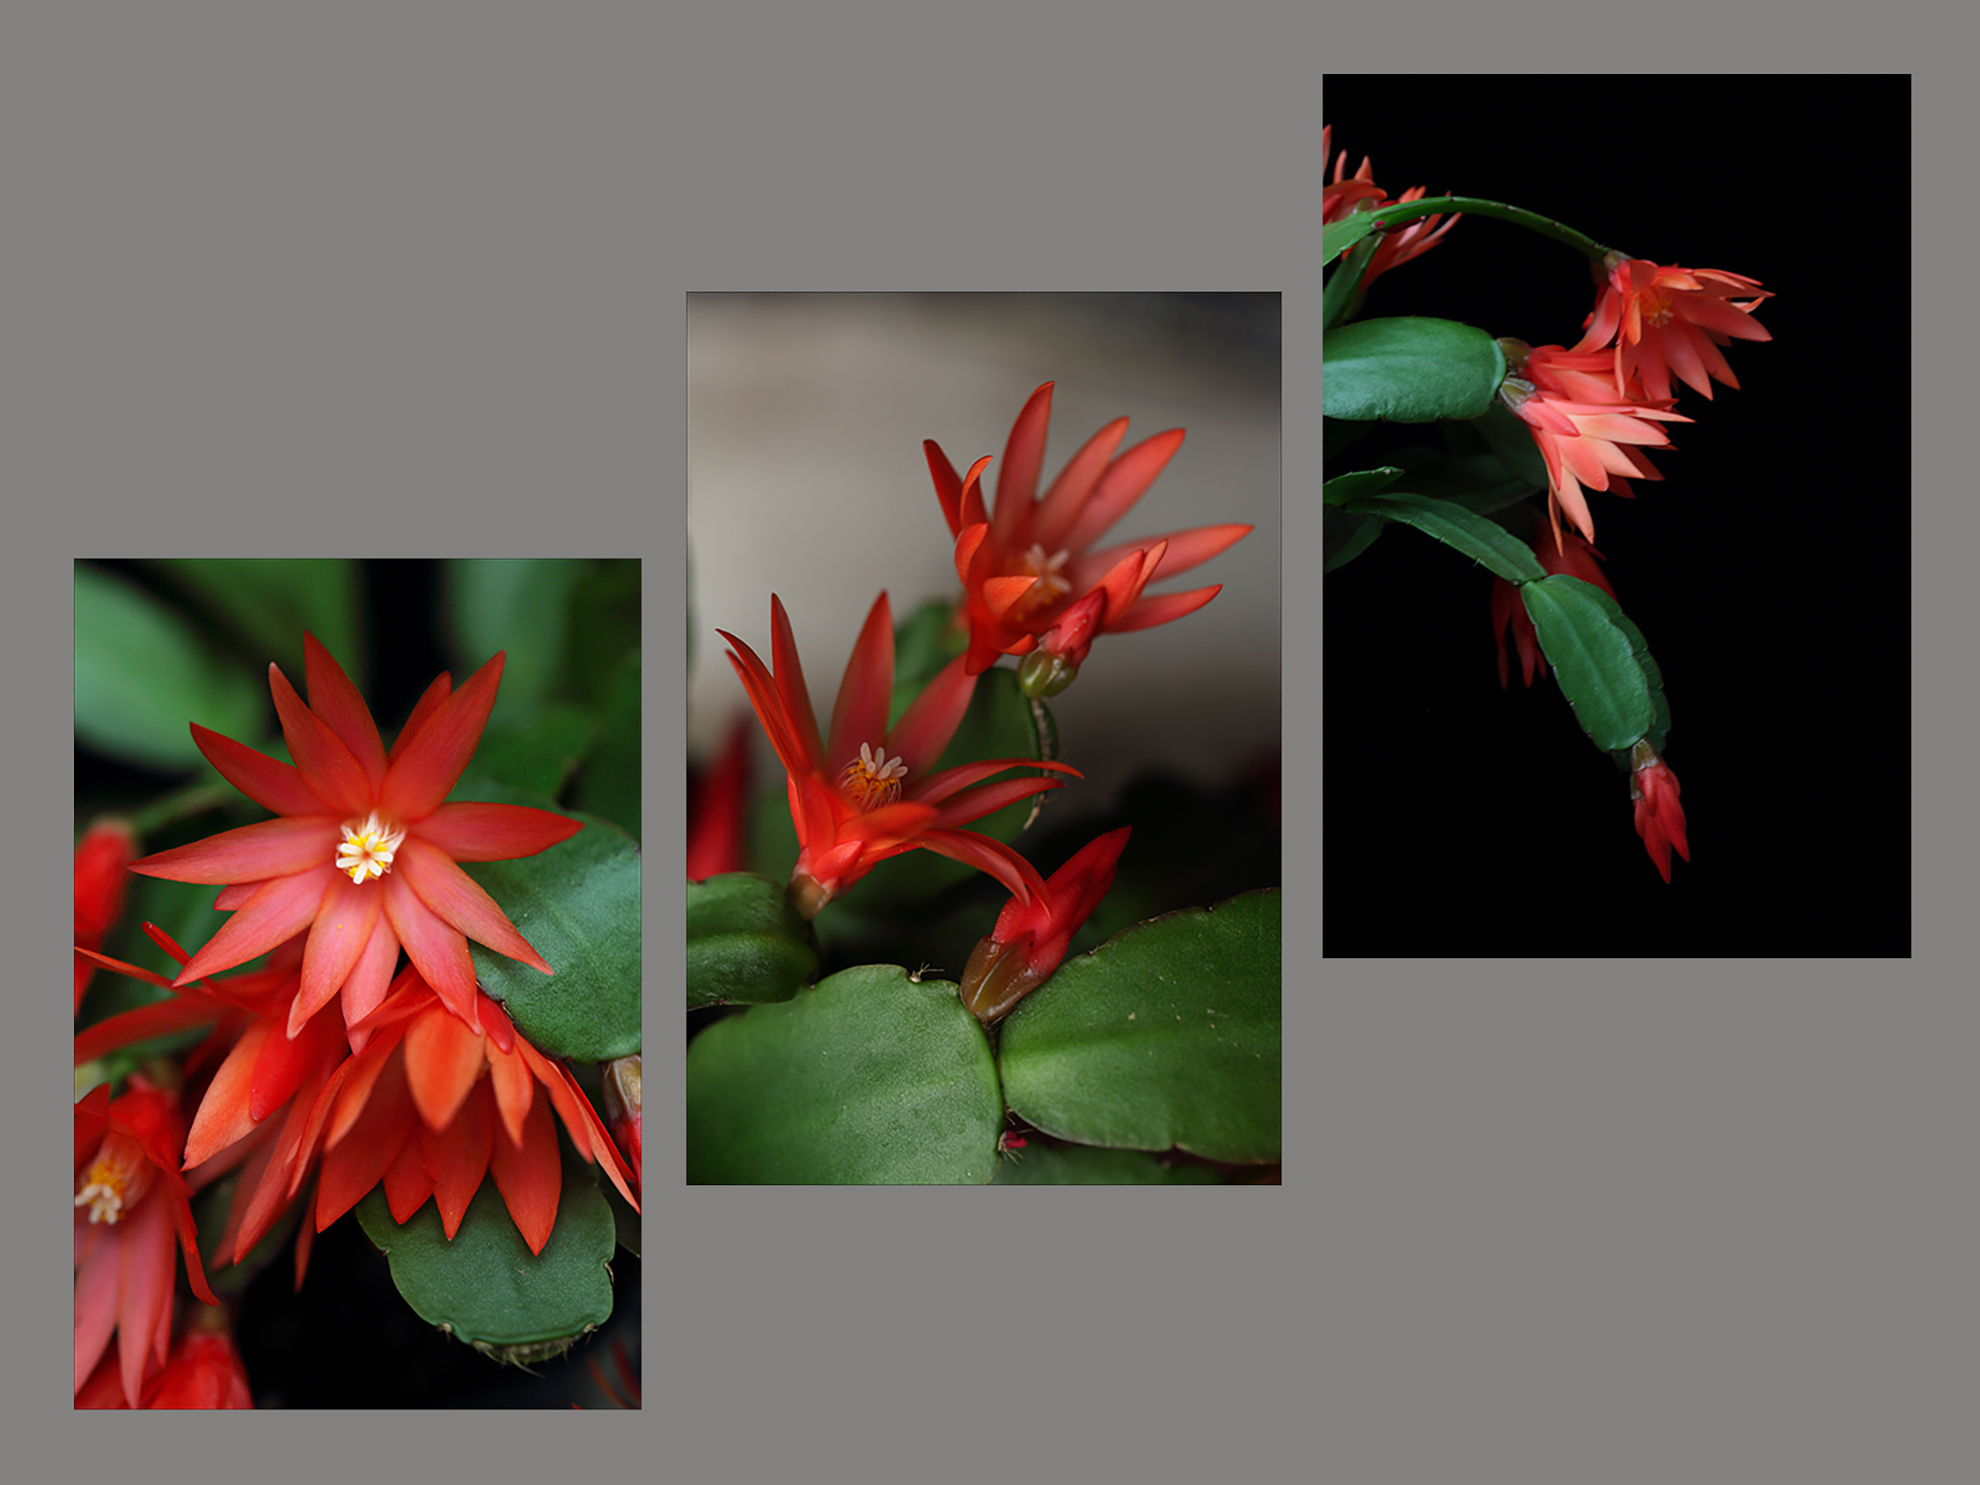 Three side by side images of a bright red petaled flowers from different angles